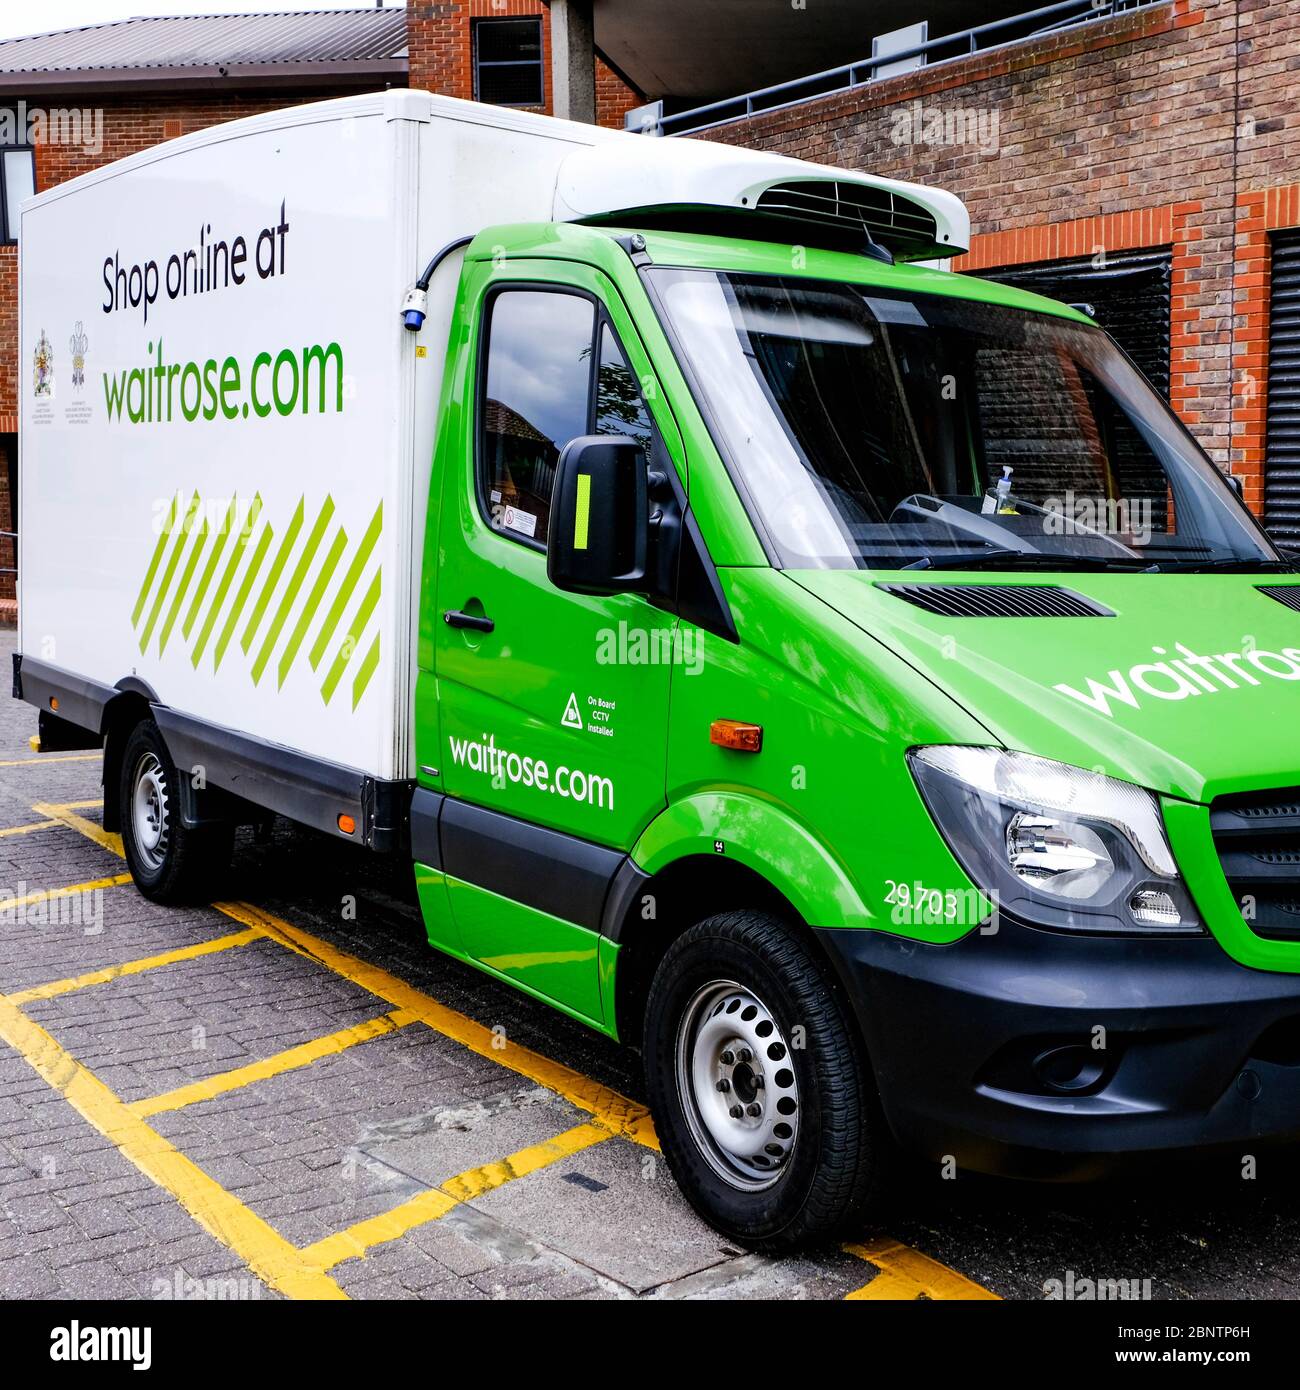 Waitrose Supermarkets Has Seen A 50 per cent Increase On Its Online Delivery Service During The Coronavirus Outbreak Stock Photo